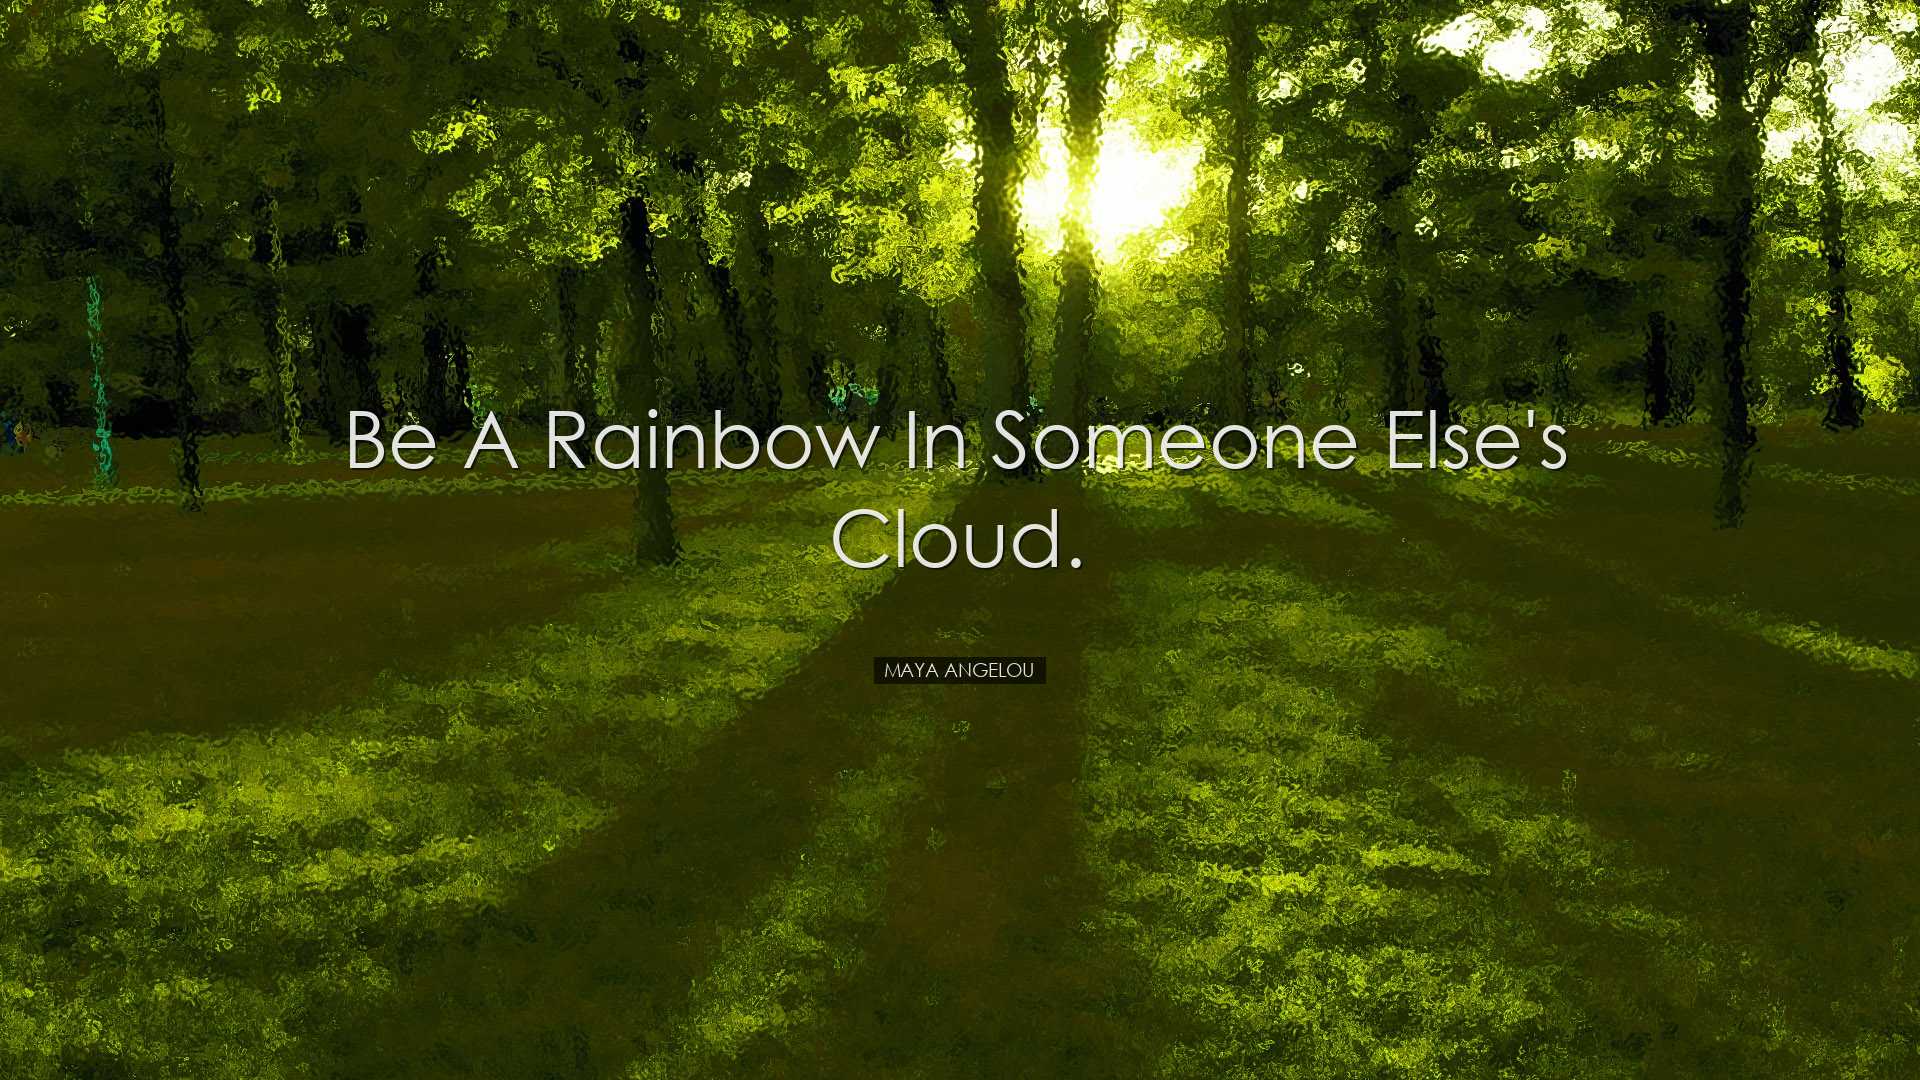 Be a rainbow in someone else's cloud. - Maya Angelou